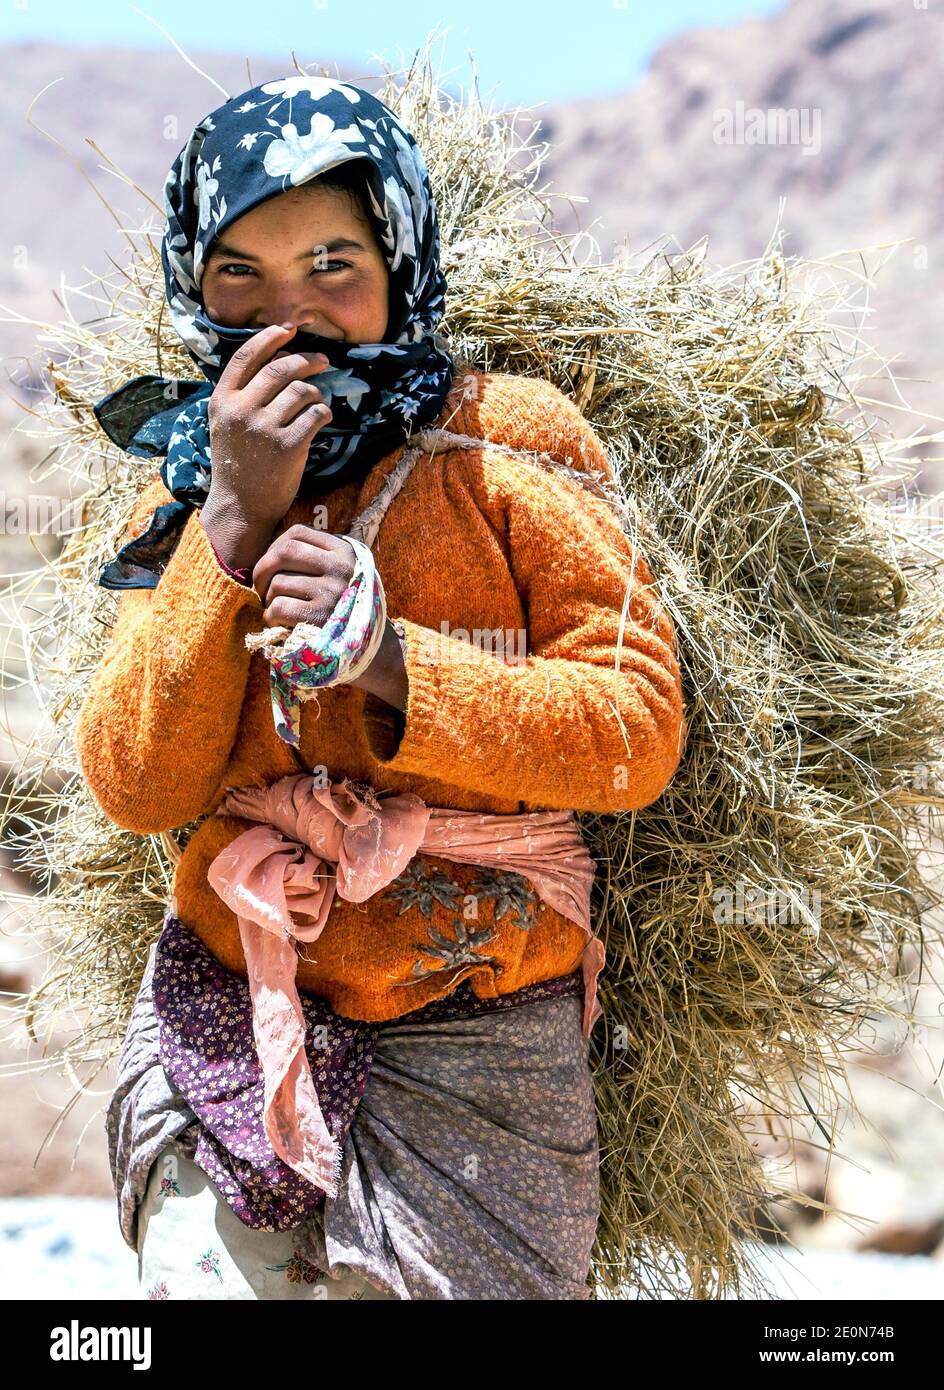 A Moroccan girl carrying a load of hay in the Todra Gorge at Tinerhir in Morocco. Todra Gorge is a canyon in the eastern High Atlas Mountains. Stock Photo